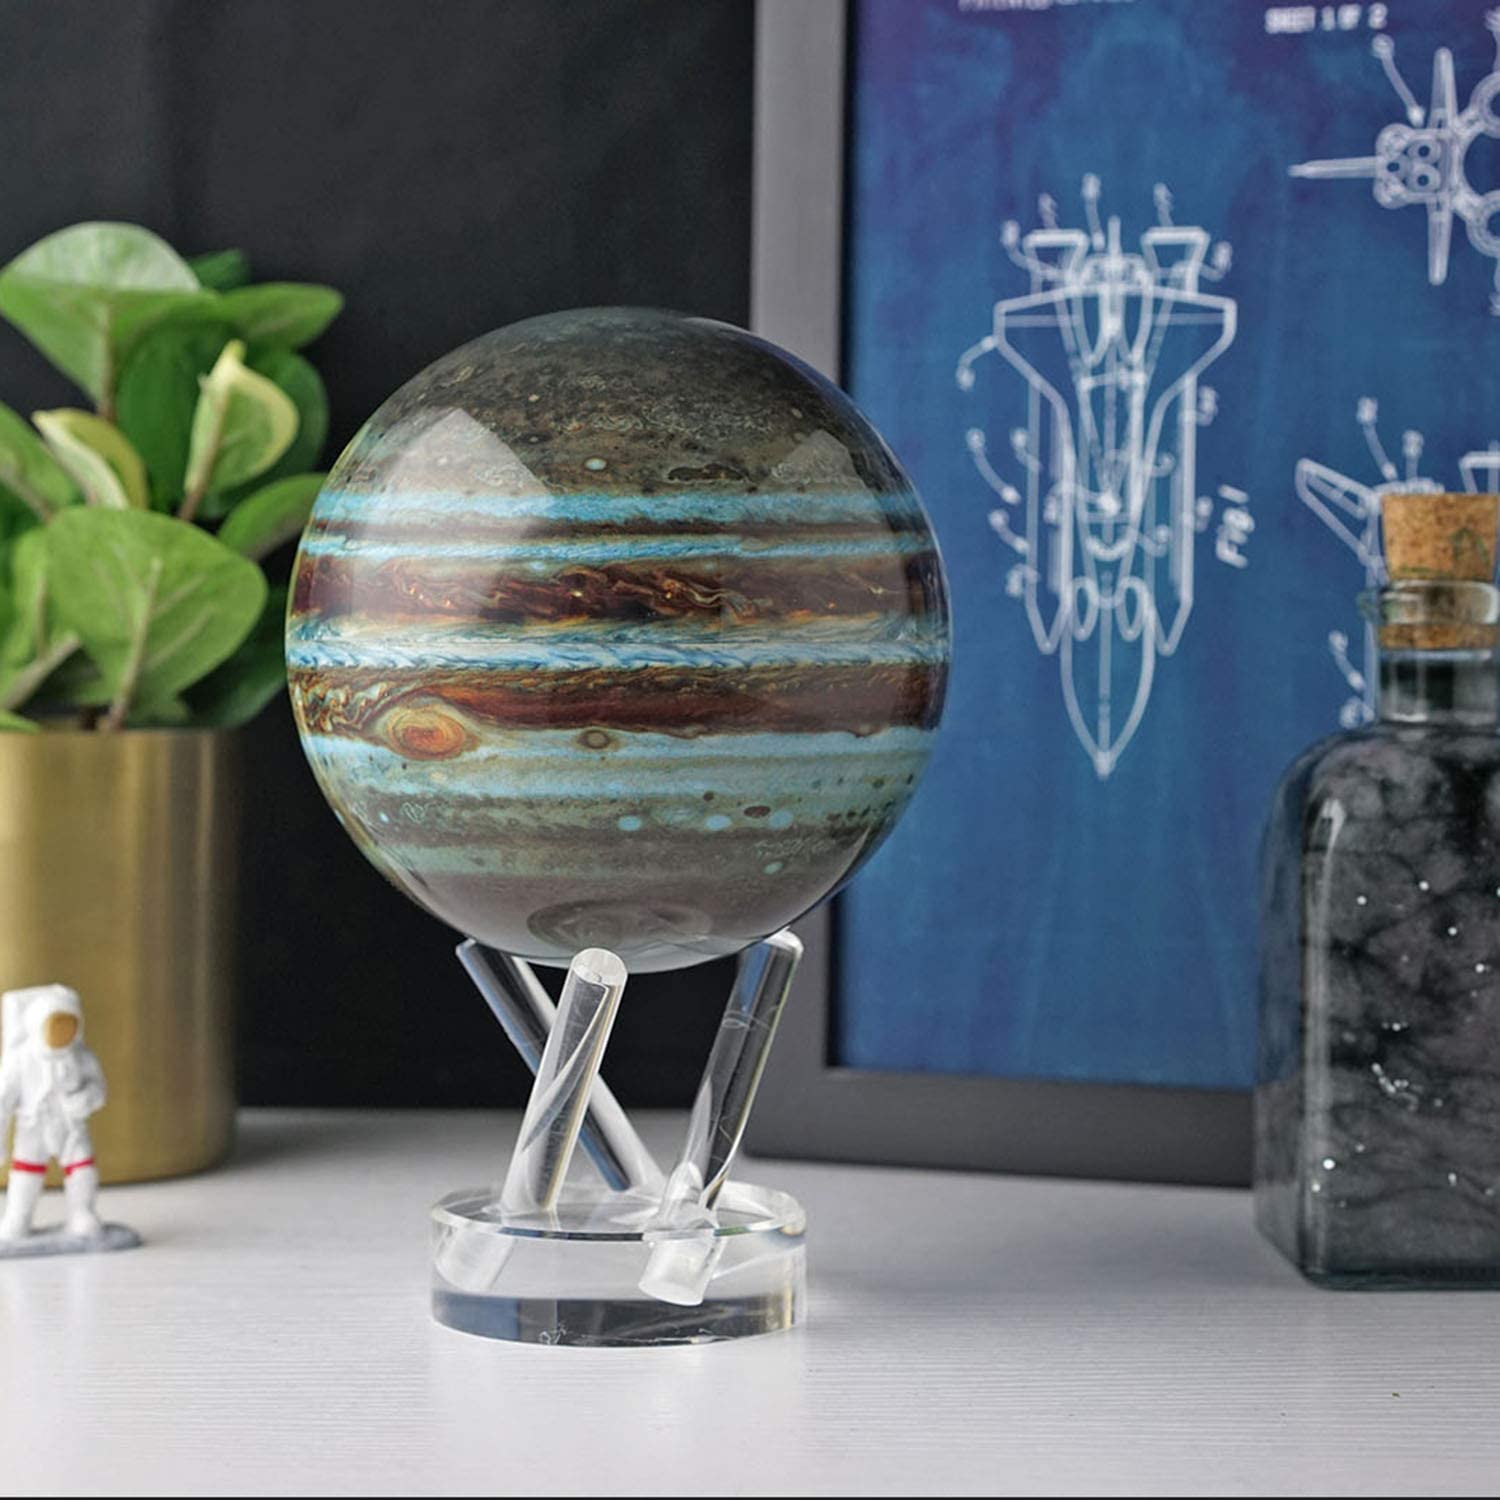 A mini version of planet Jupiter which spins and rotates using solar technology.